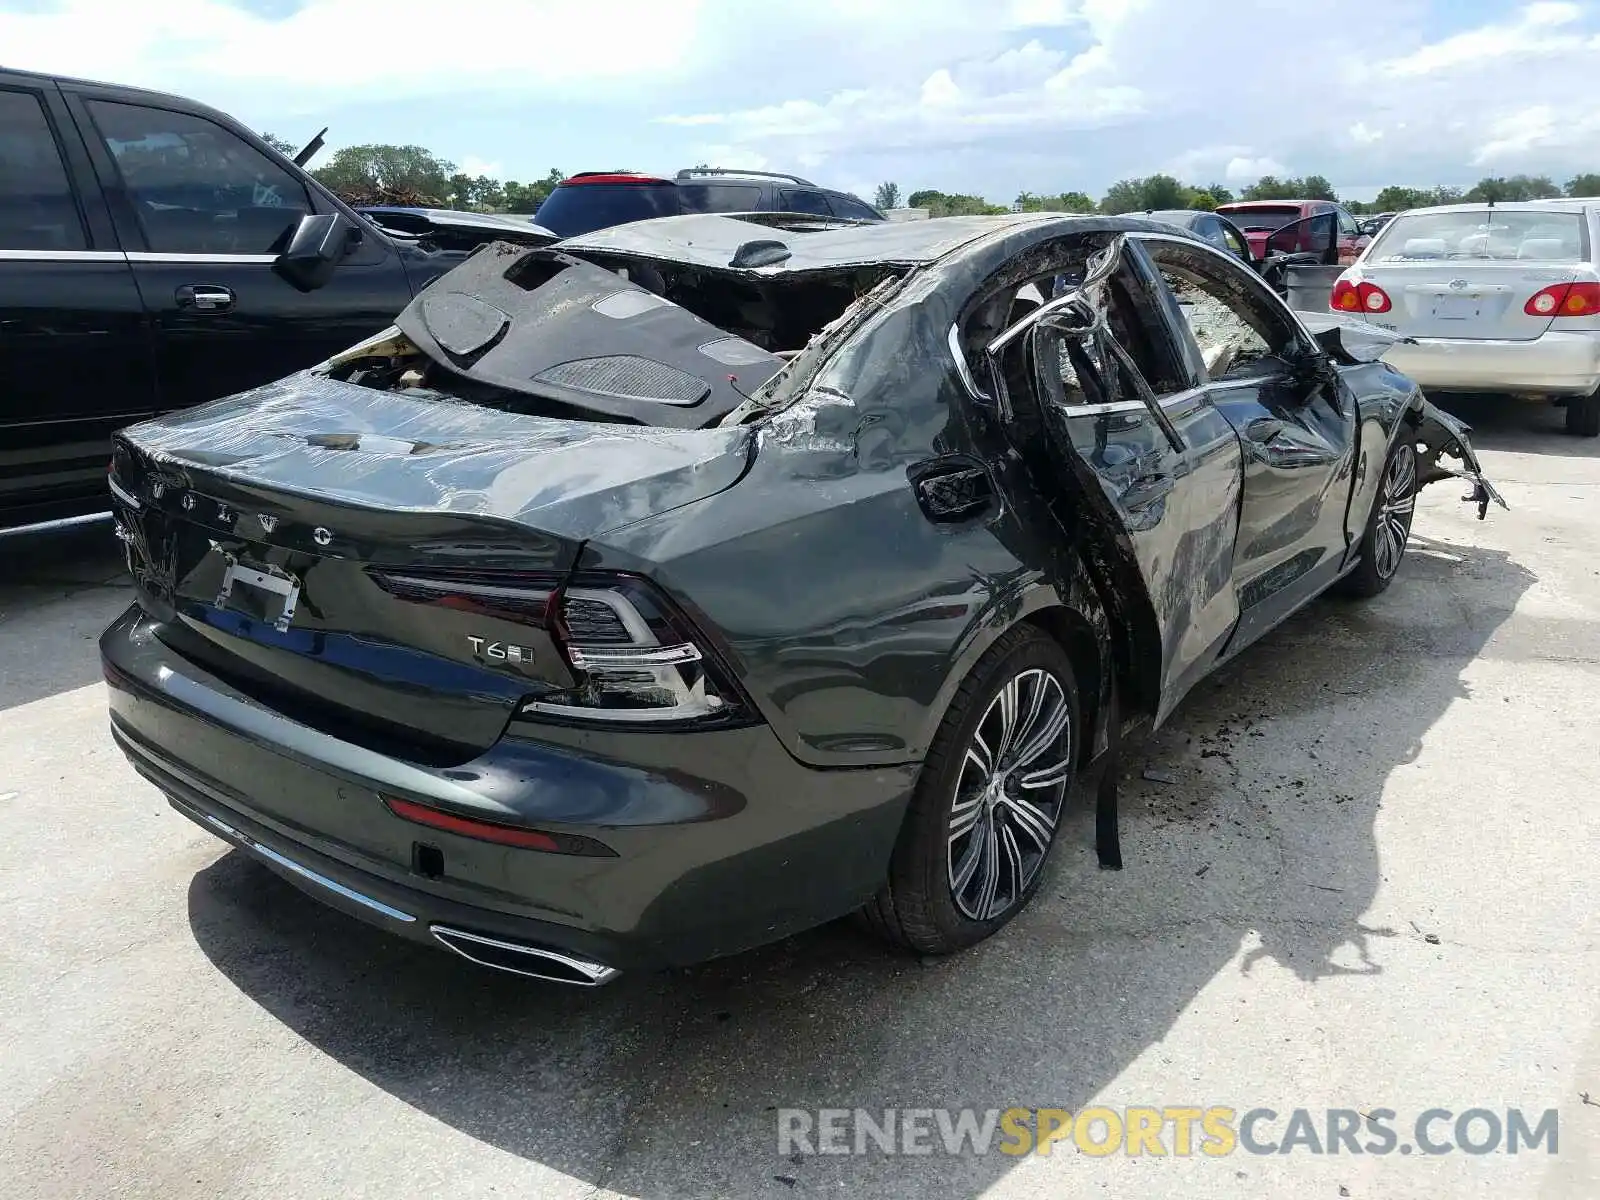 4 Photograph of a damaged car 7JRA22TL8KG009587 VOLVO S60 T6 INS 2019